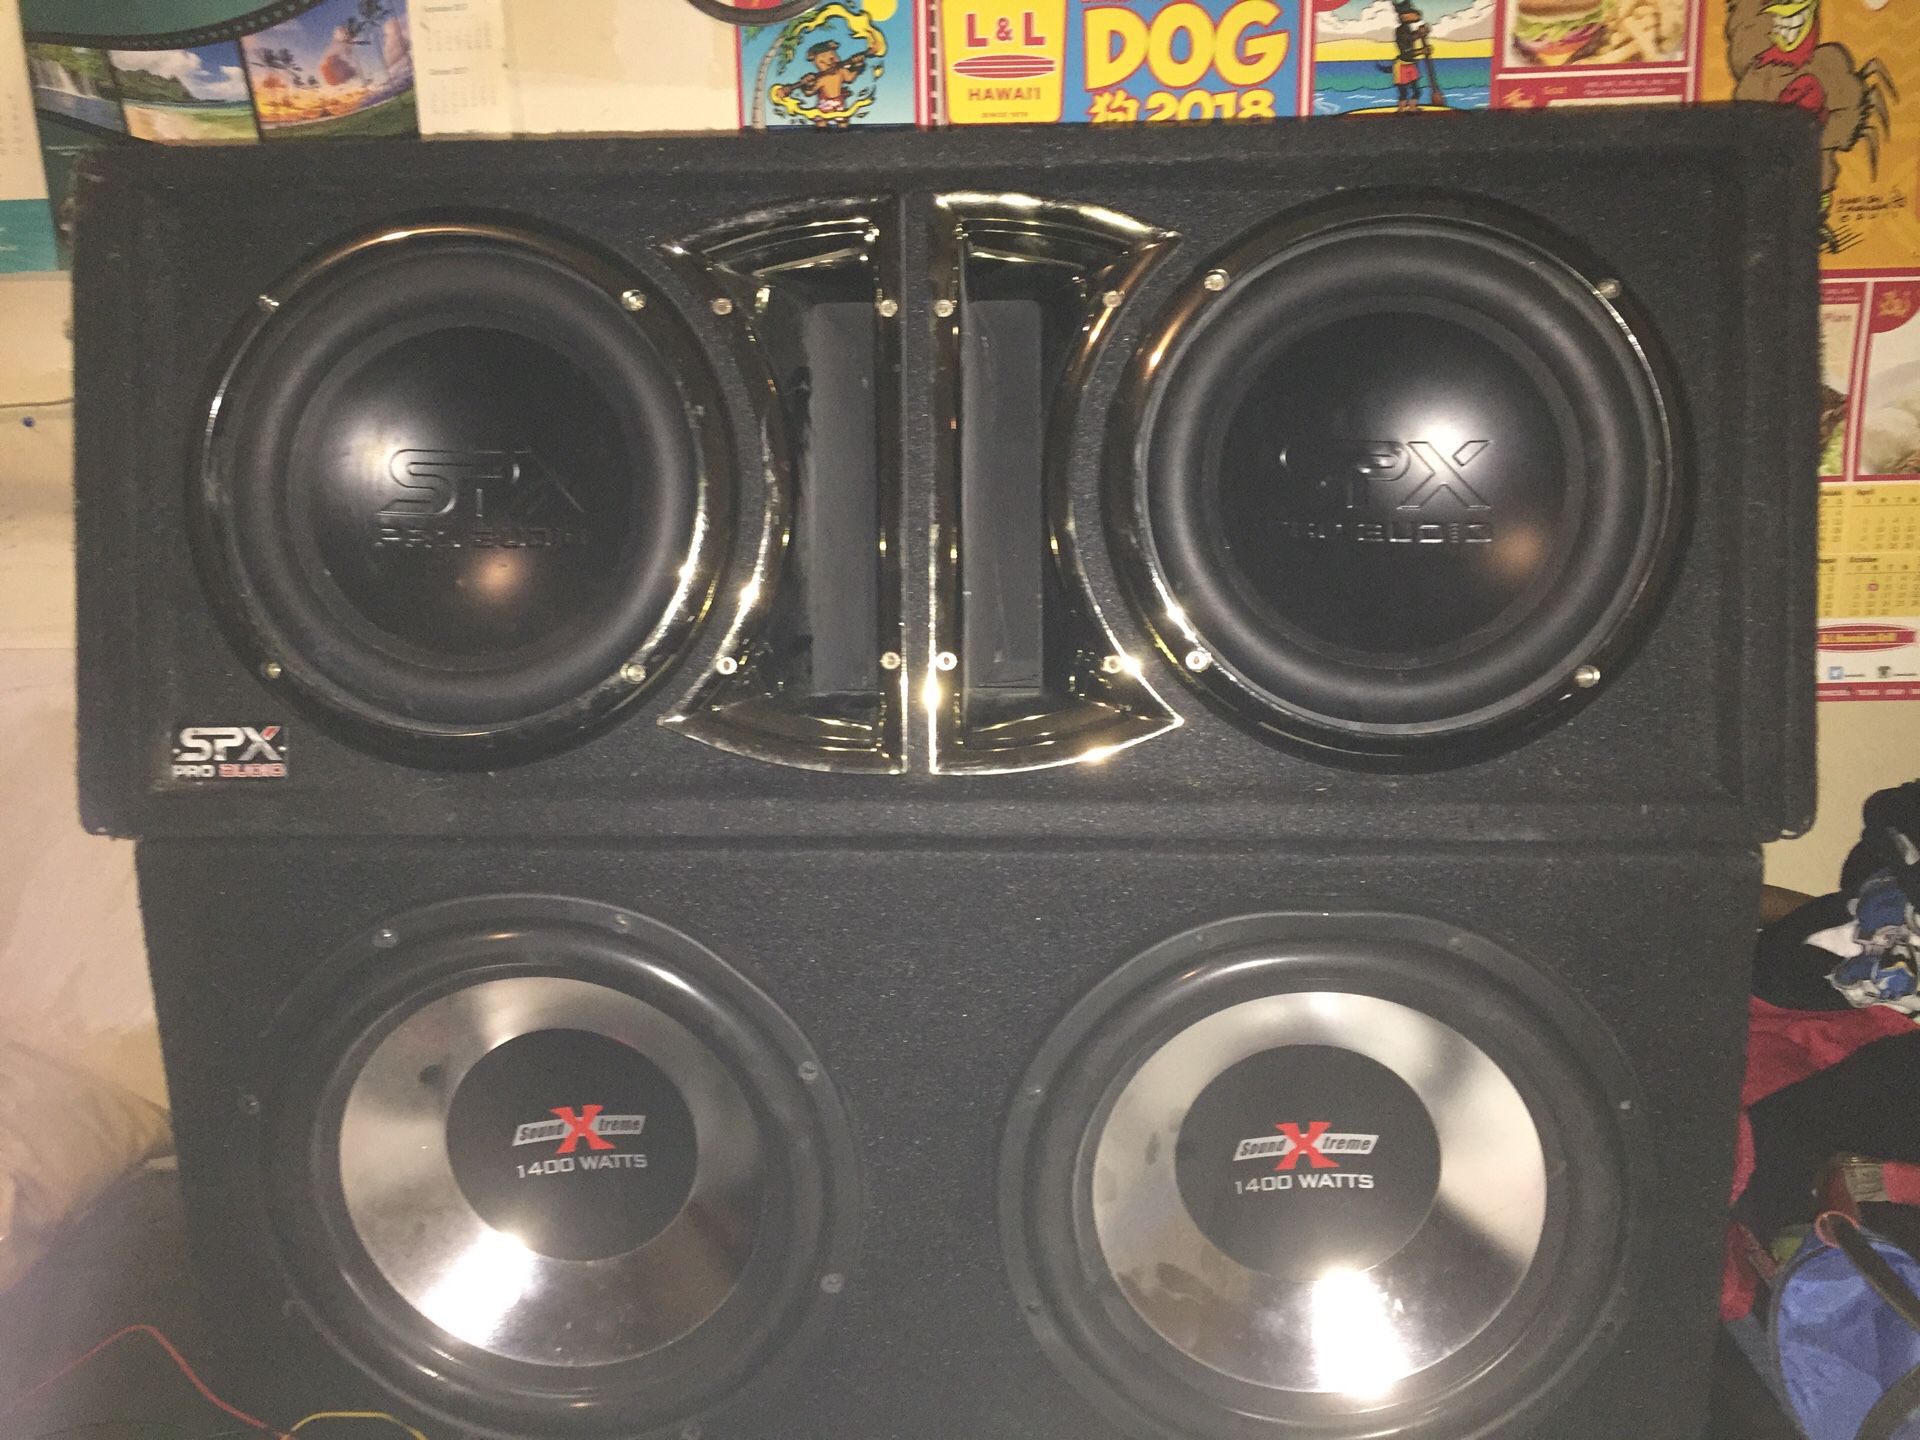 SPX soundxtreme subwoofers California amp and off brand Bluetooth deck 2 10” subs and 2 12” subs 1 Bluetooth deck 1, 600 watt bridgable amp